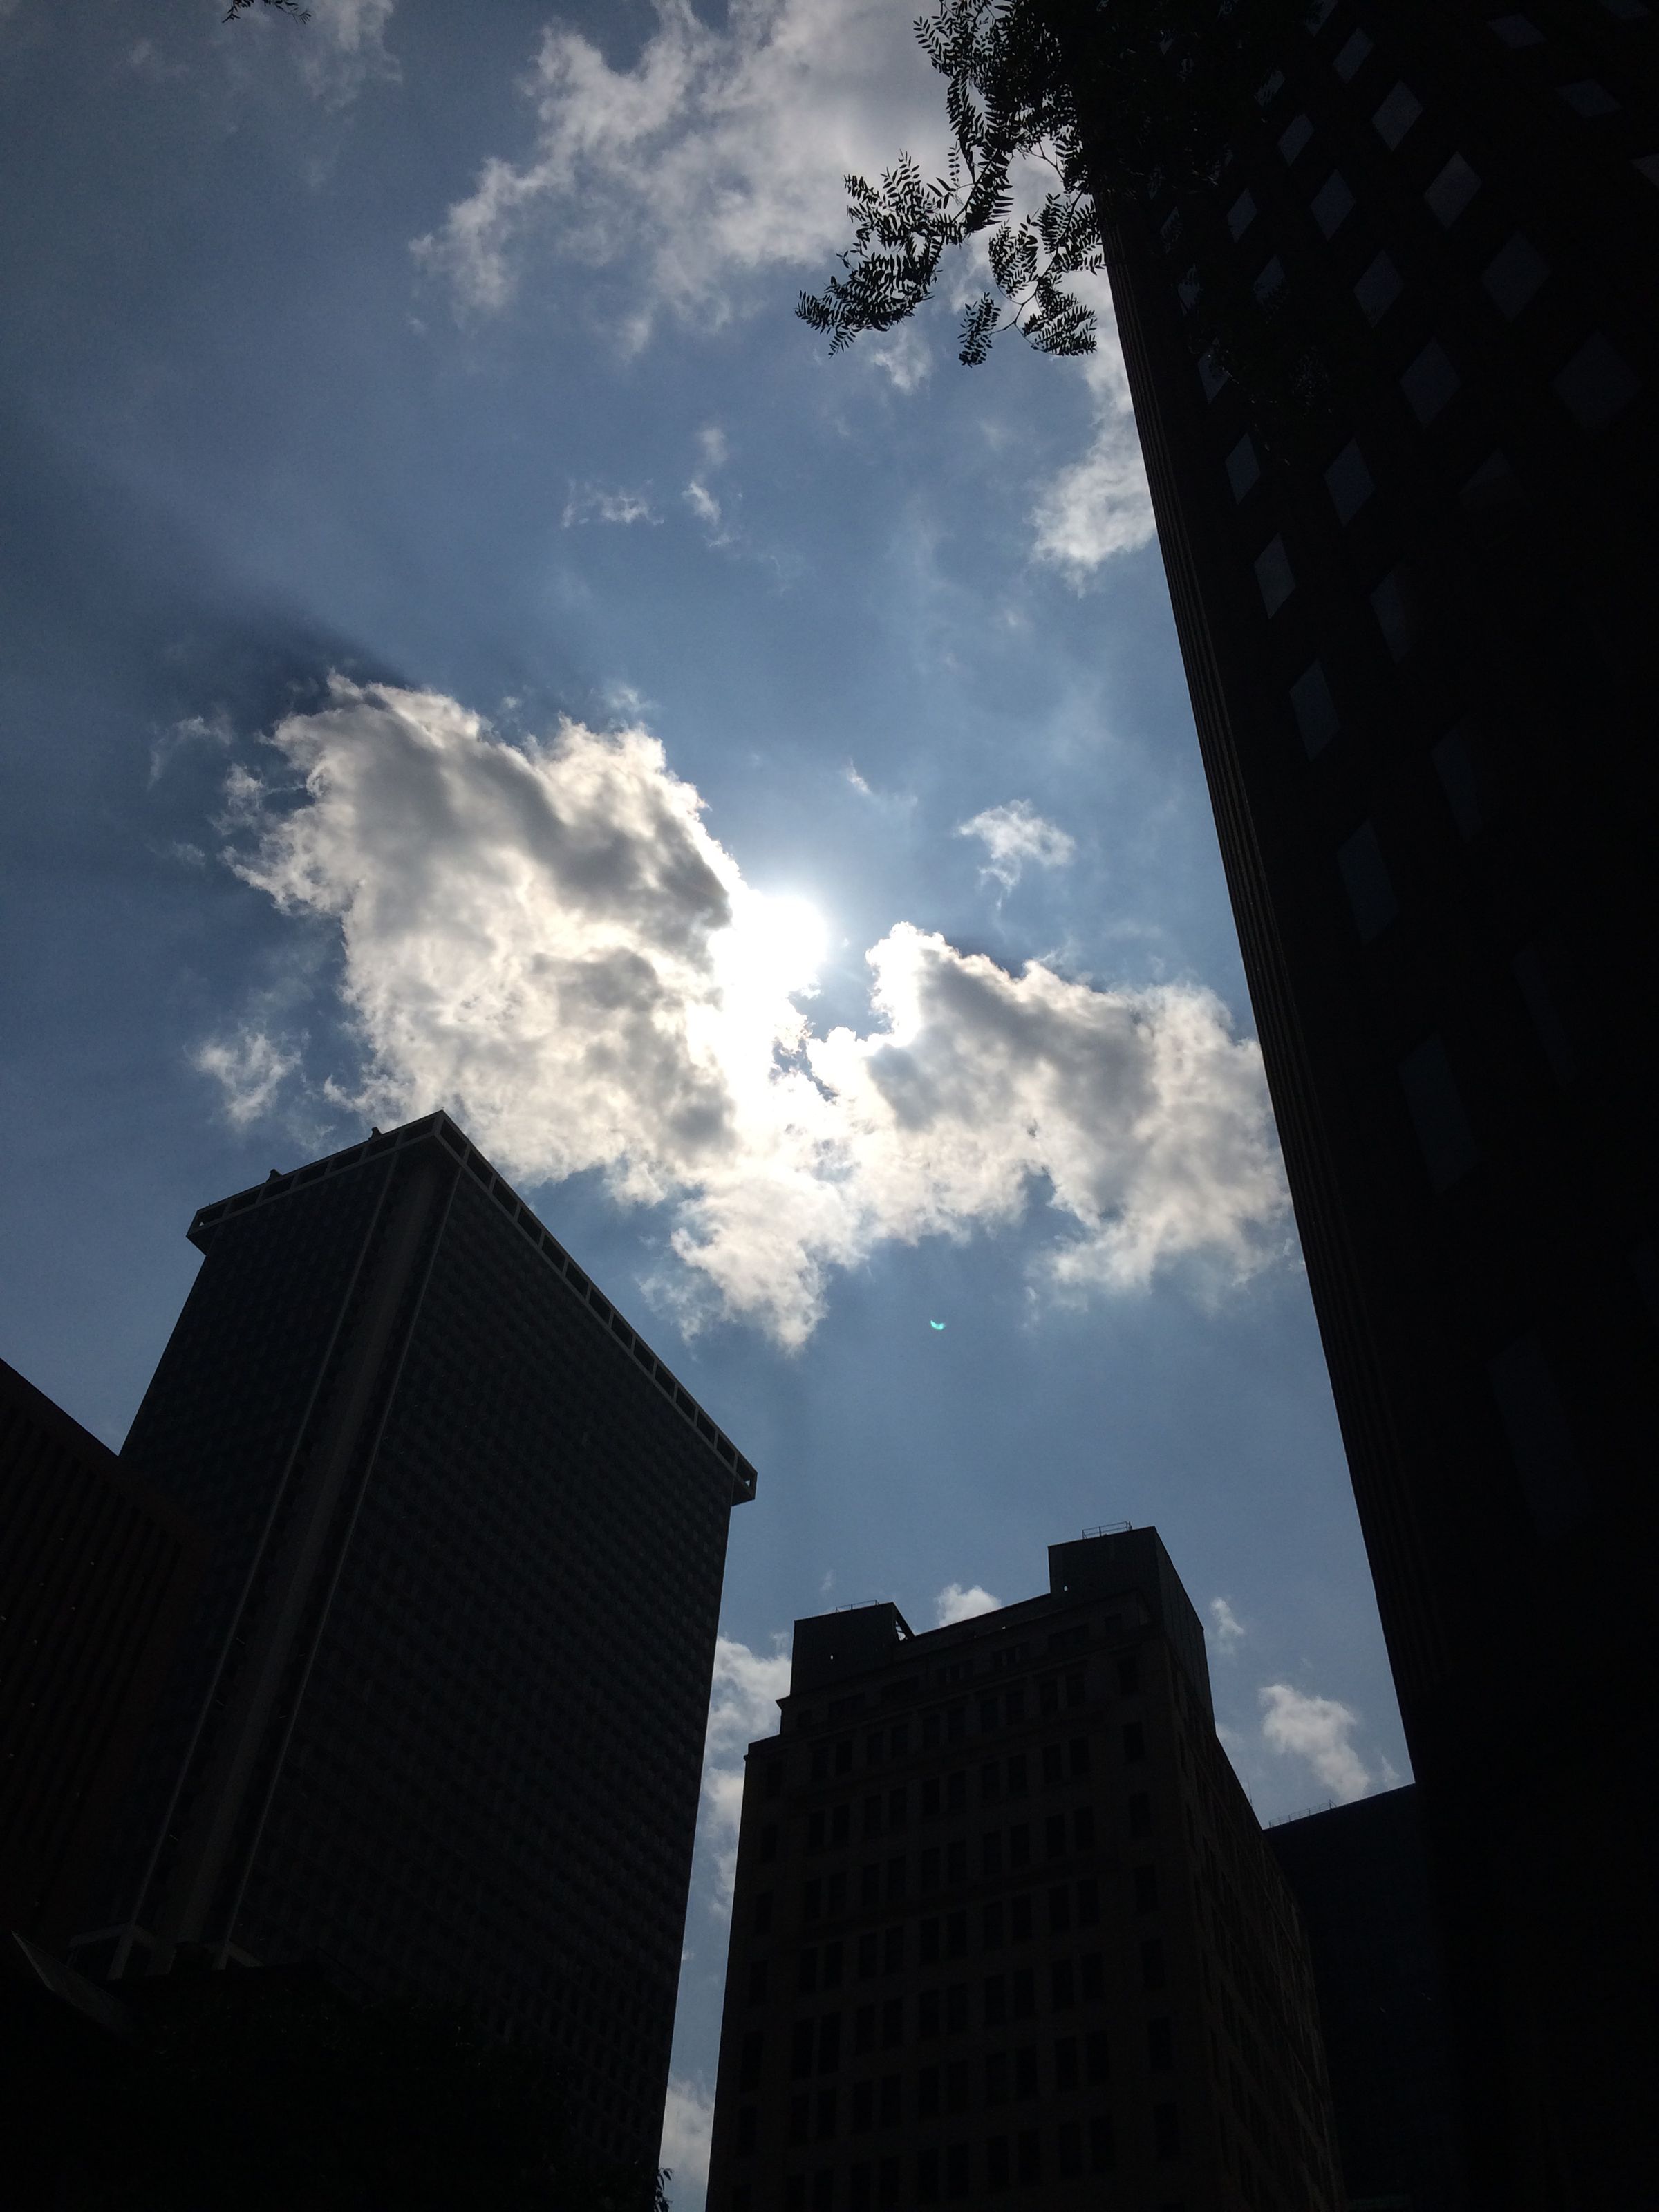 Eclipse over the financial district in Manhattan.